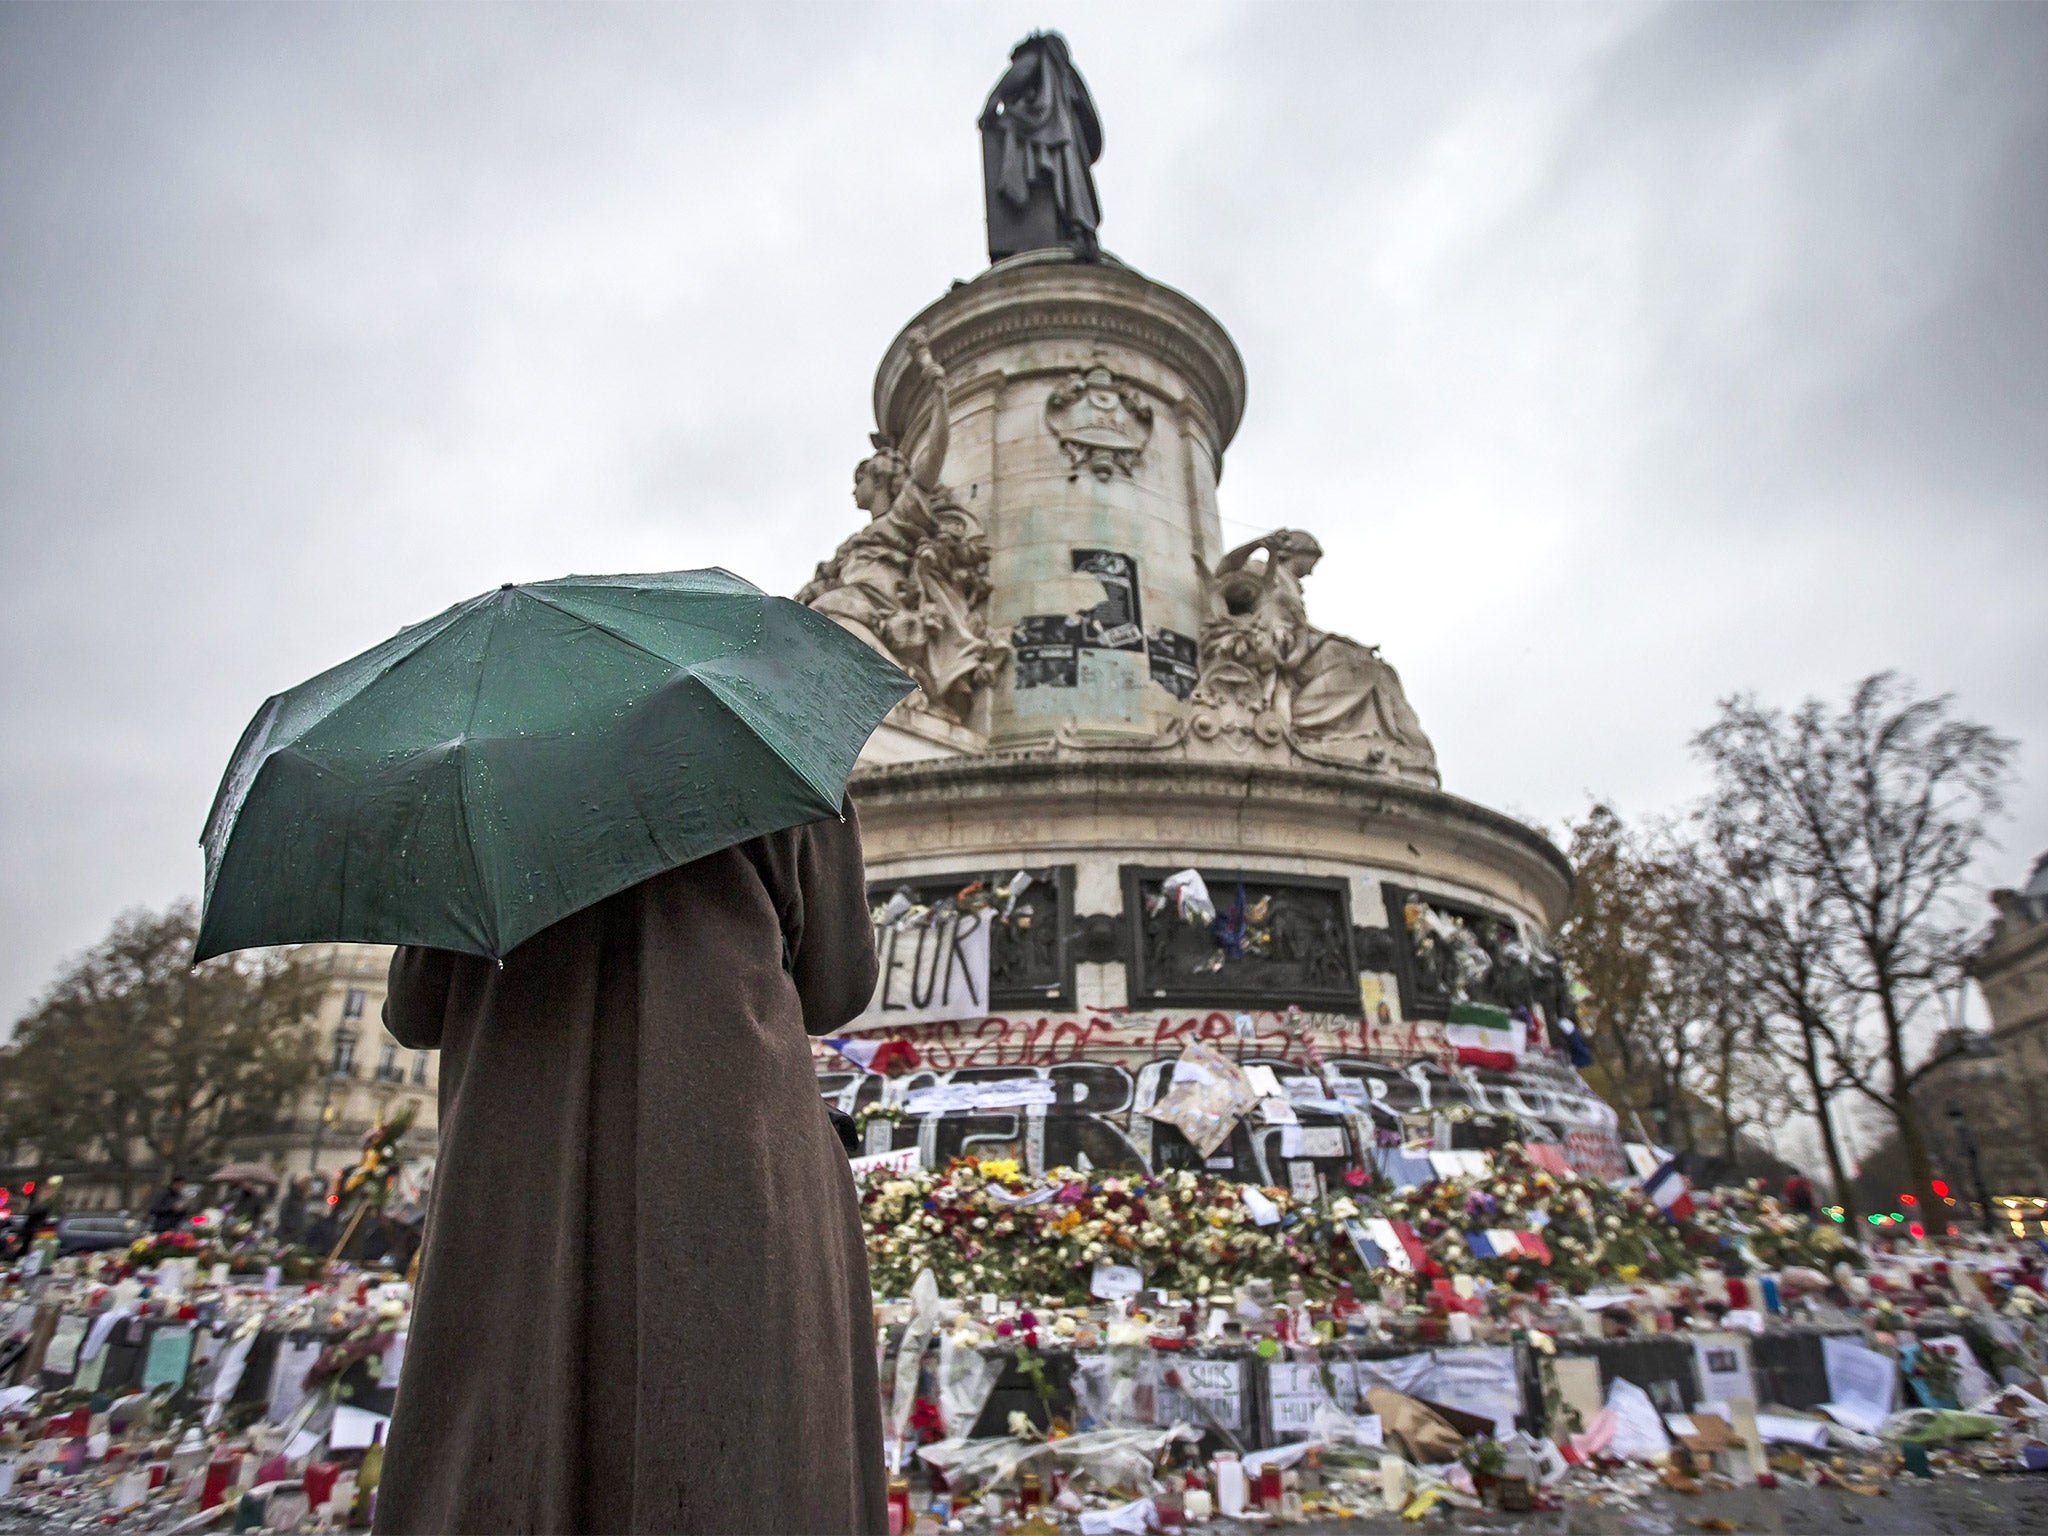 The makeshift shrine of candles and flowers for the victims of last week’s Paris attacks in Place de la Republique